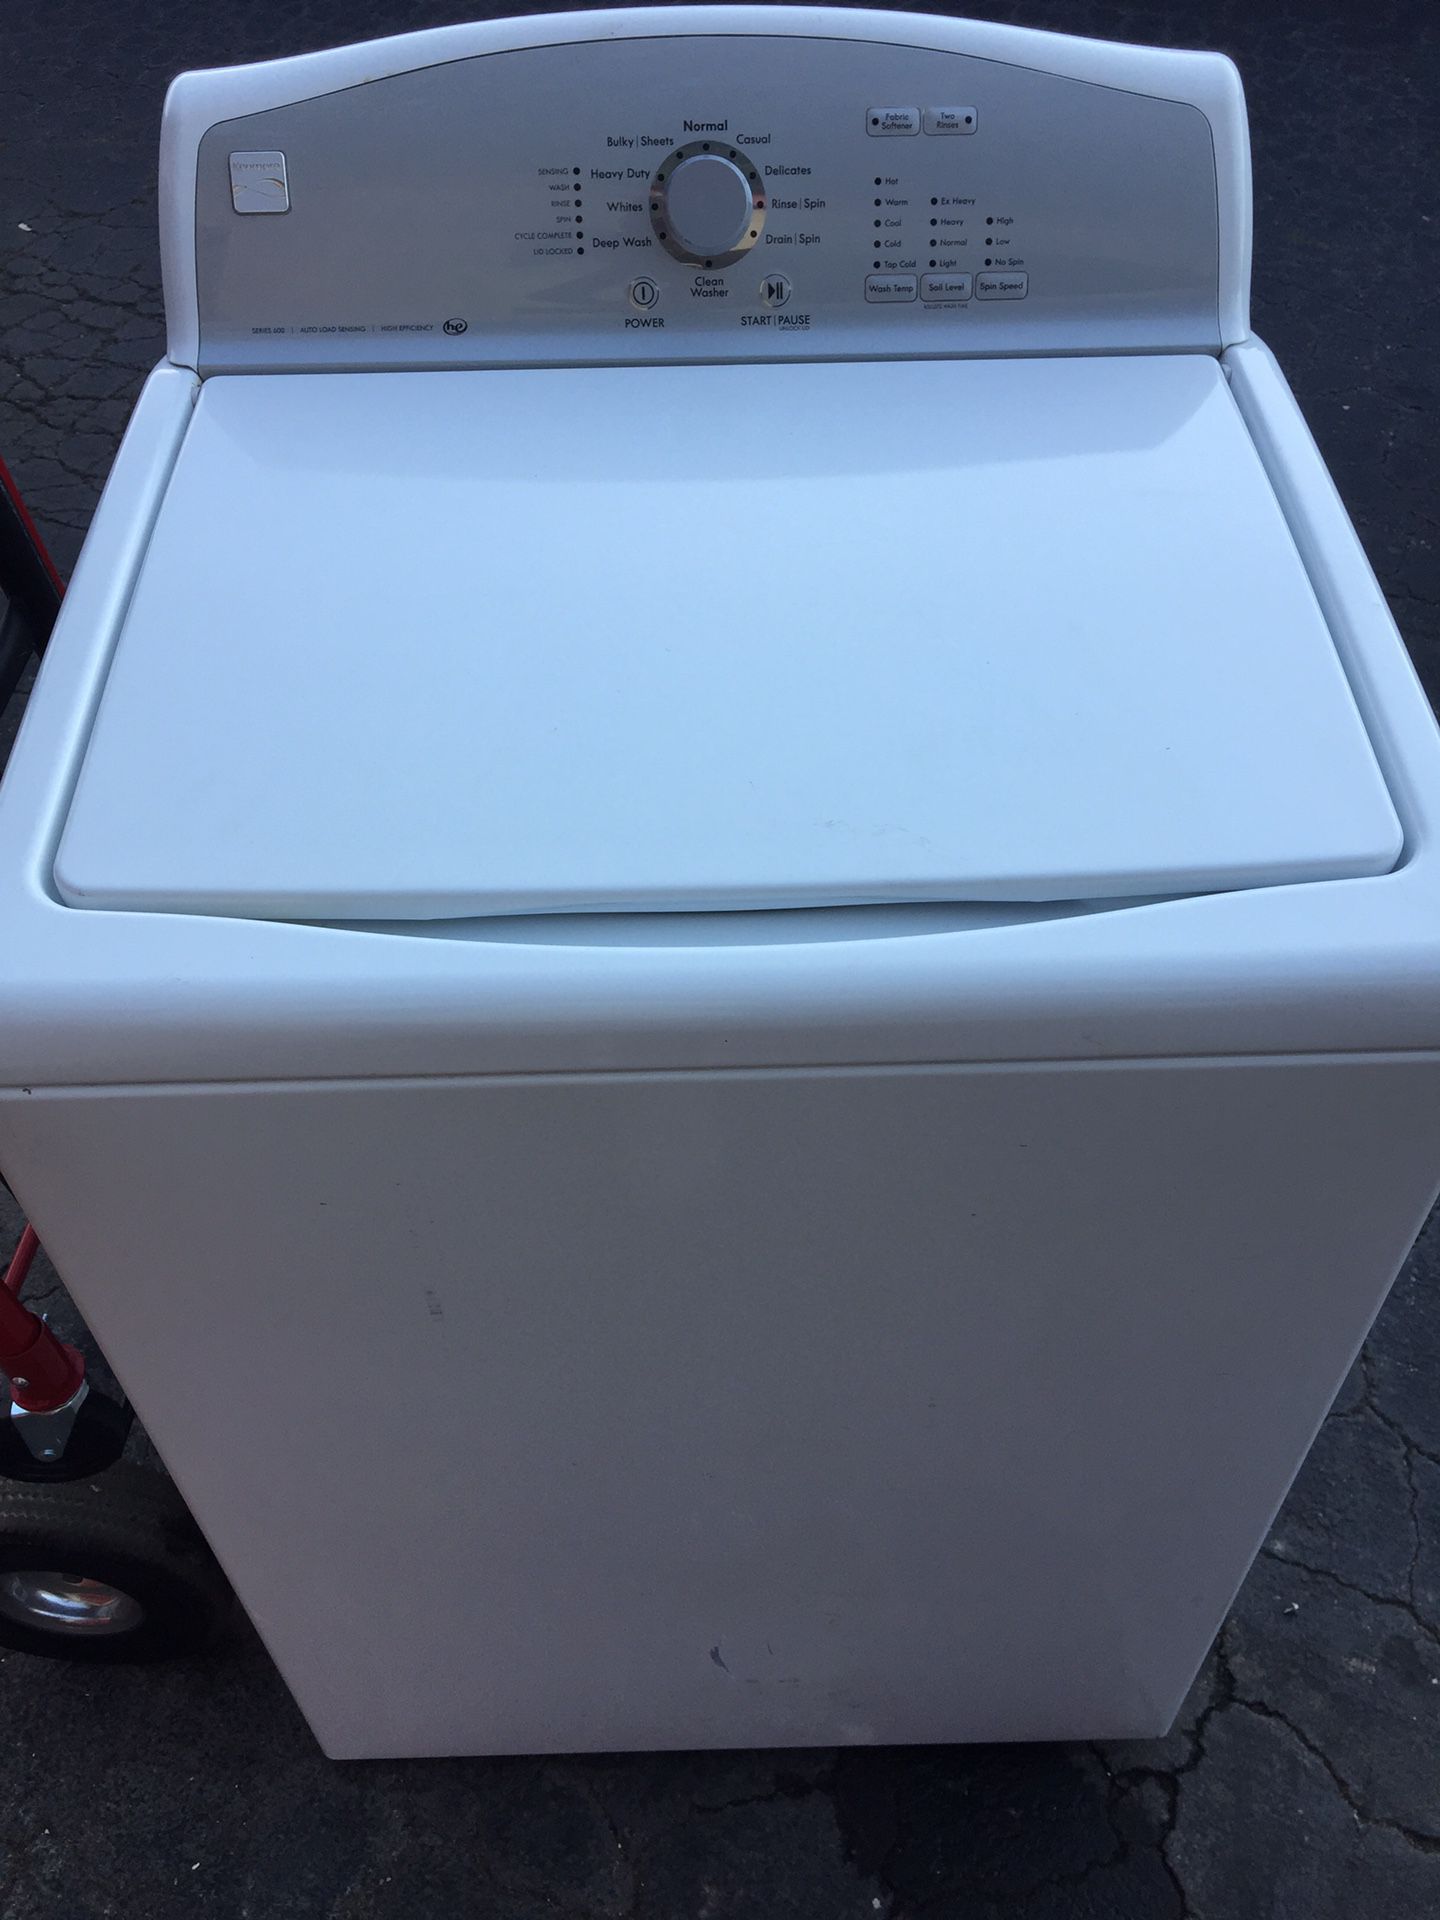 Affordable Washer